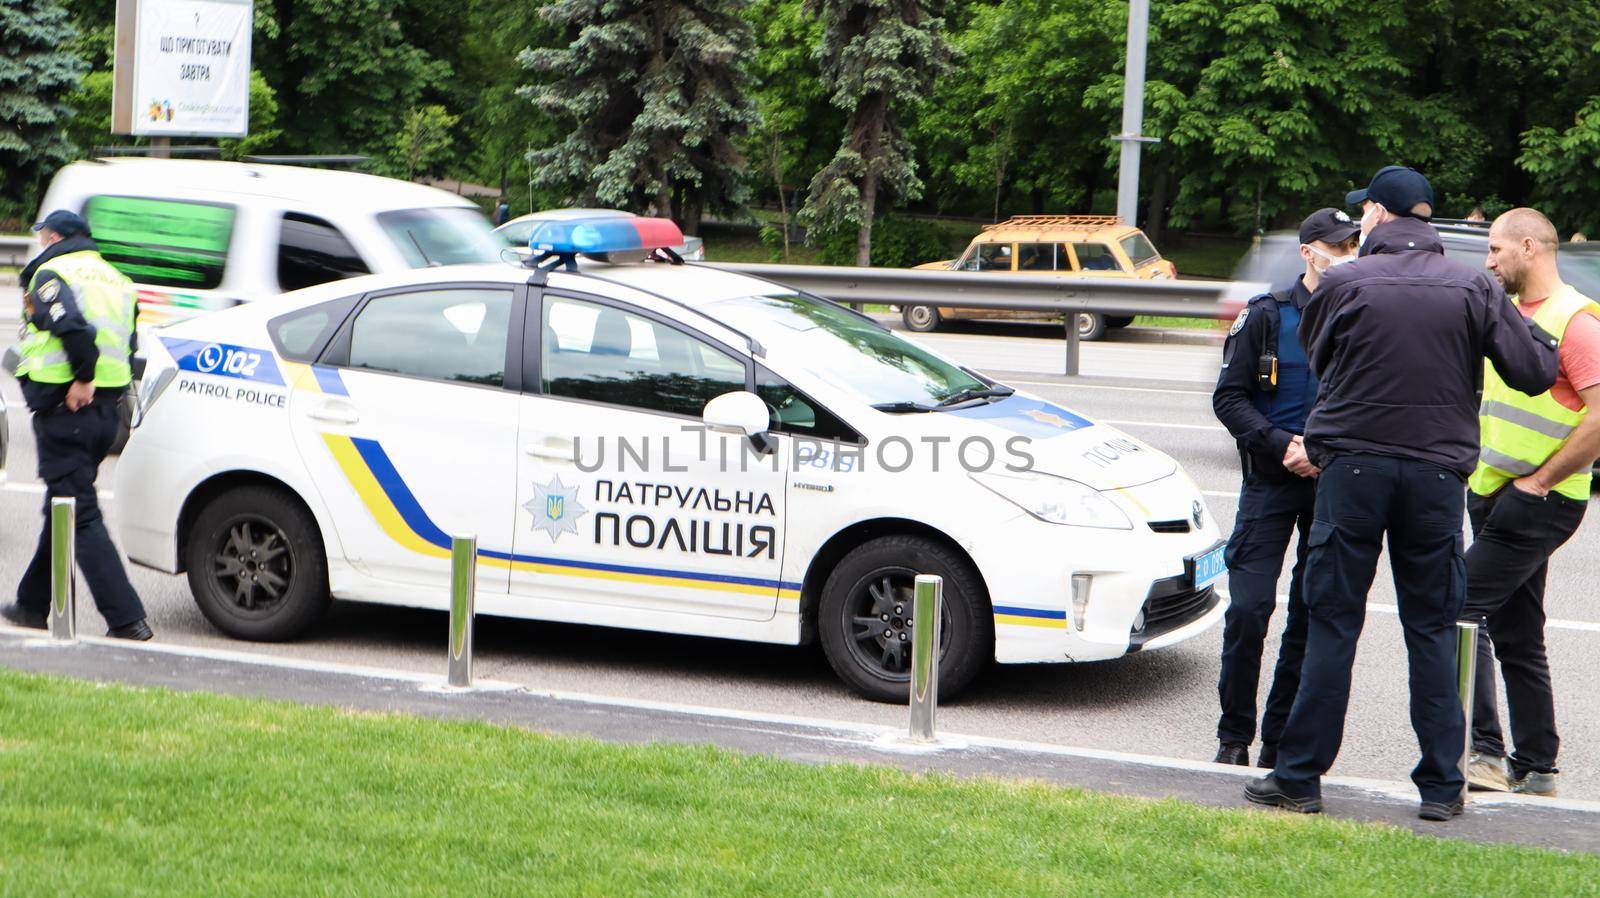 Ukraine, Kiev - June 2, 2020. Police patrol cars provide safety on the roads of Kiev in Ukraine. A male policeman stands near his car on the roadway.